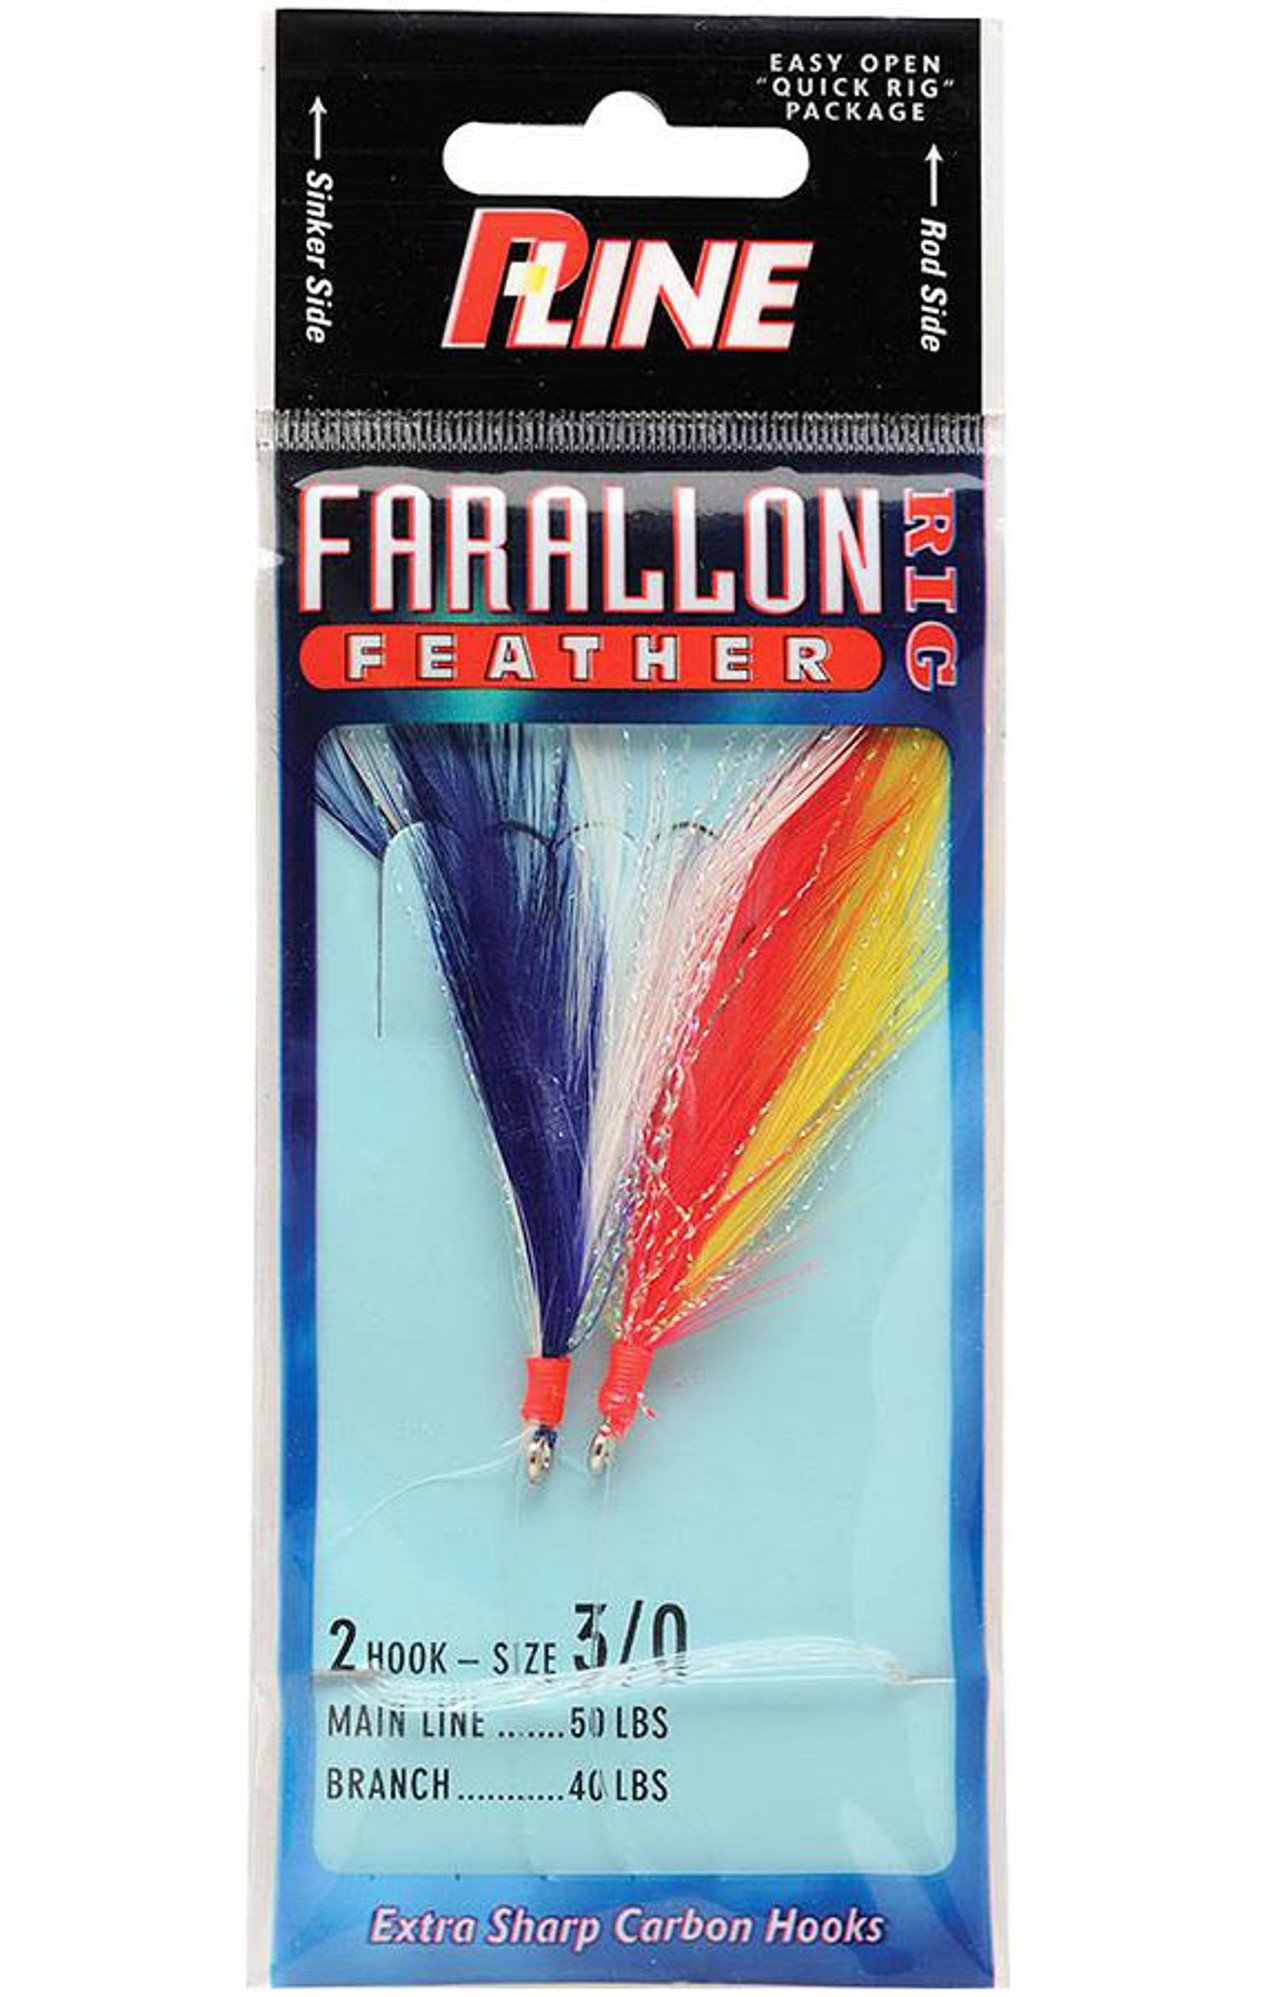 P-Line Farallon Feathers Vertical Fishing Jigs (Size: 5/0 Blue